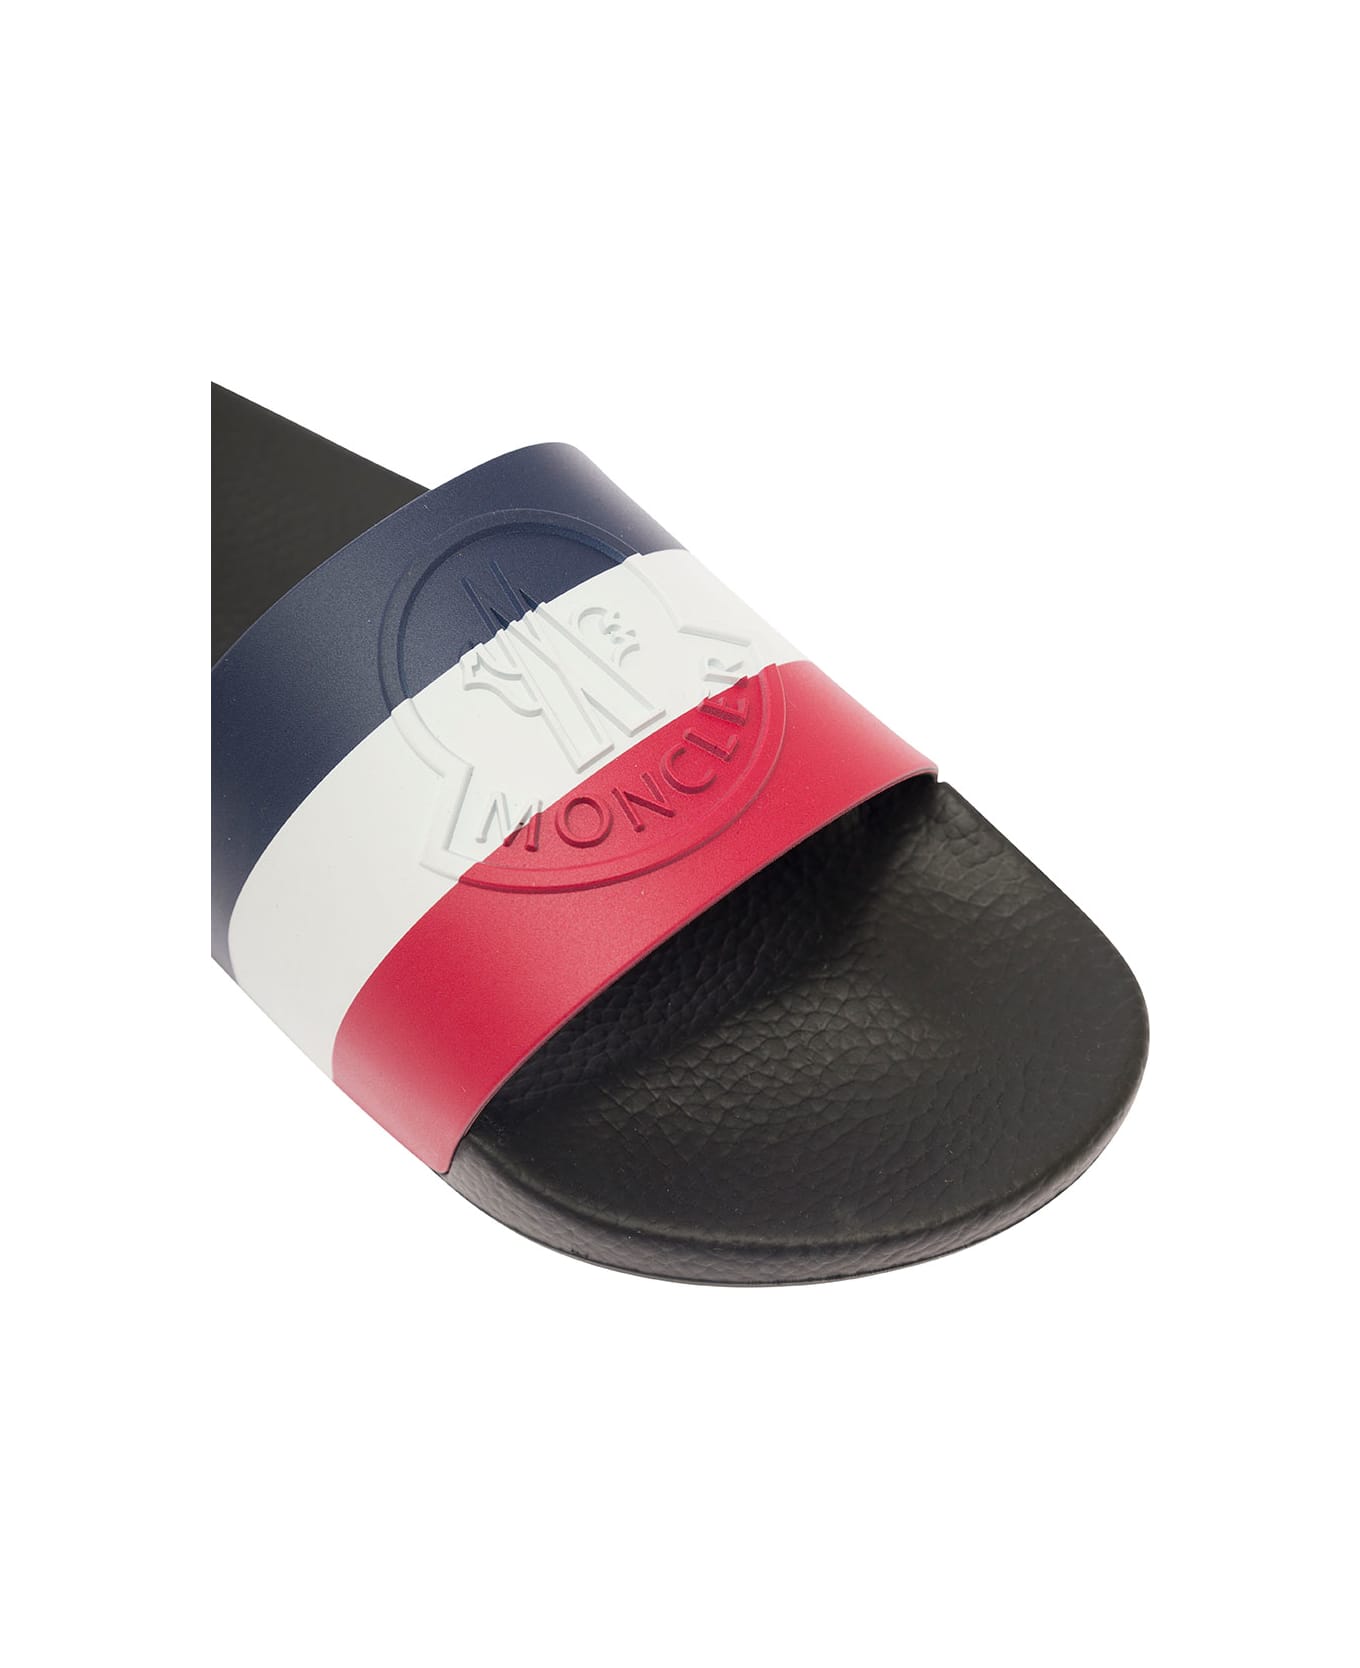 Moncler 'basile' Blue Slides With Tricolour Toe Strap In Rubber Man - Blu/rosso/bianco その他各種シューズ